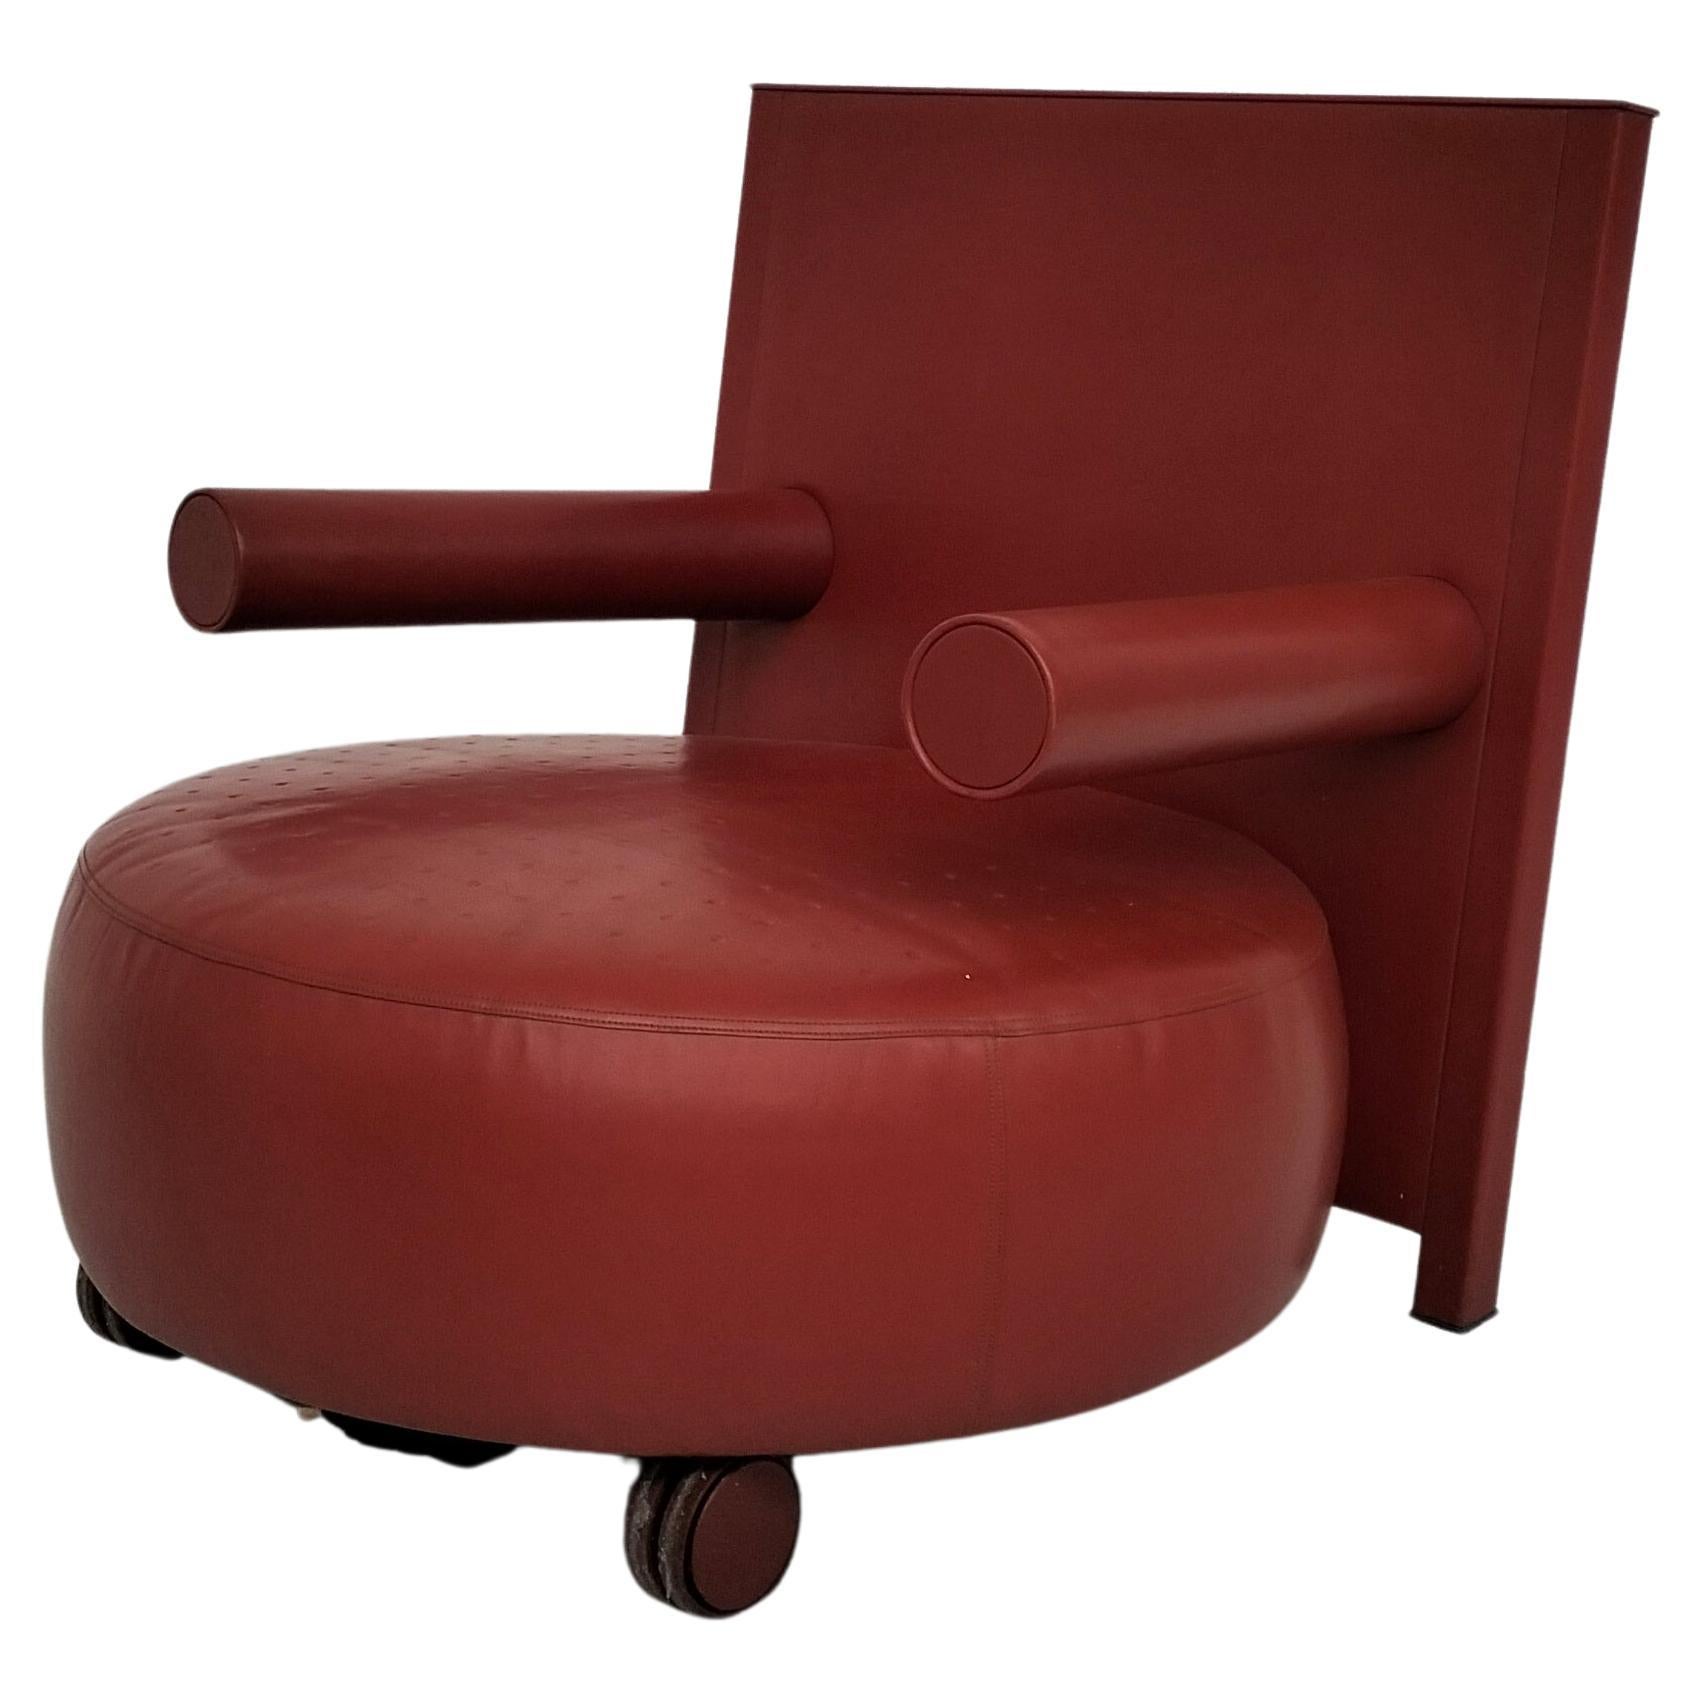 Baisity leather armchair by Antonio Citterio for B&B Italia - 1980’s For Sale